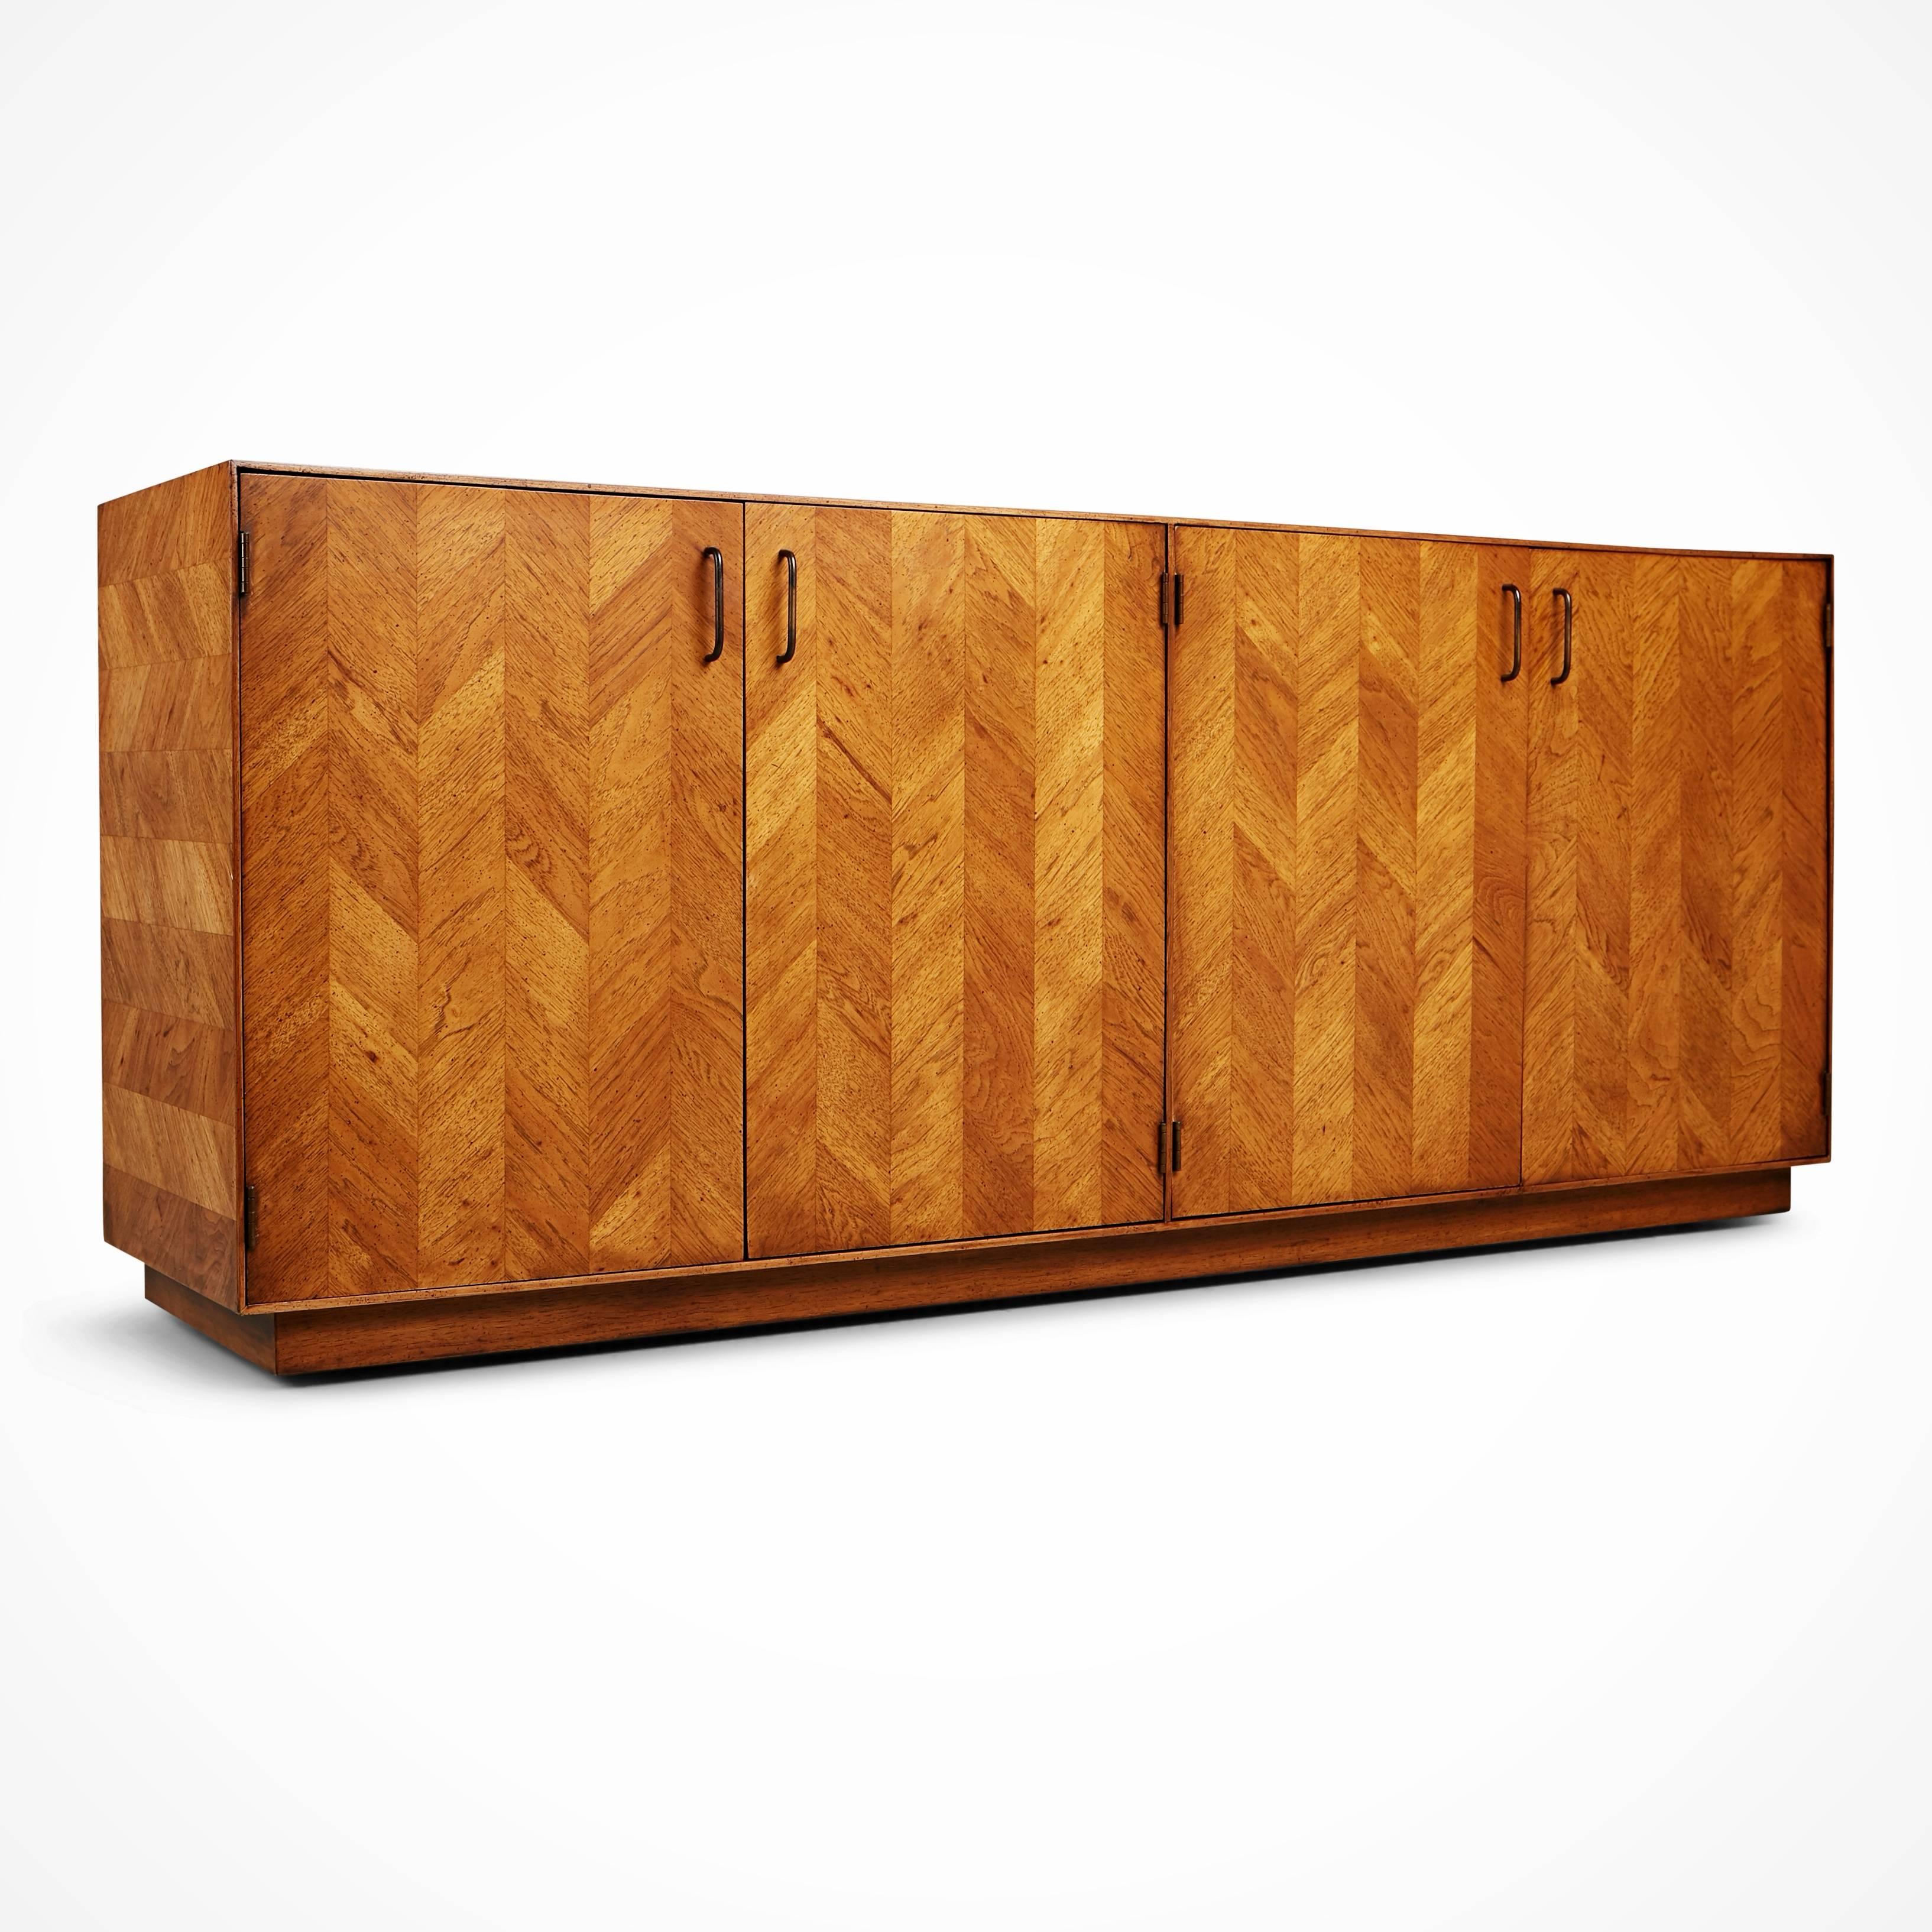 Newly restored expansive sideboard (or credenza) by Lane. Featuring an attractive parquet frontage on the cabinets which has been newly refinished, bringing out the intricacies of the beautiful herringbone pattern. The left hand cupboard opens to